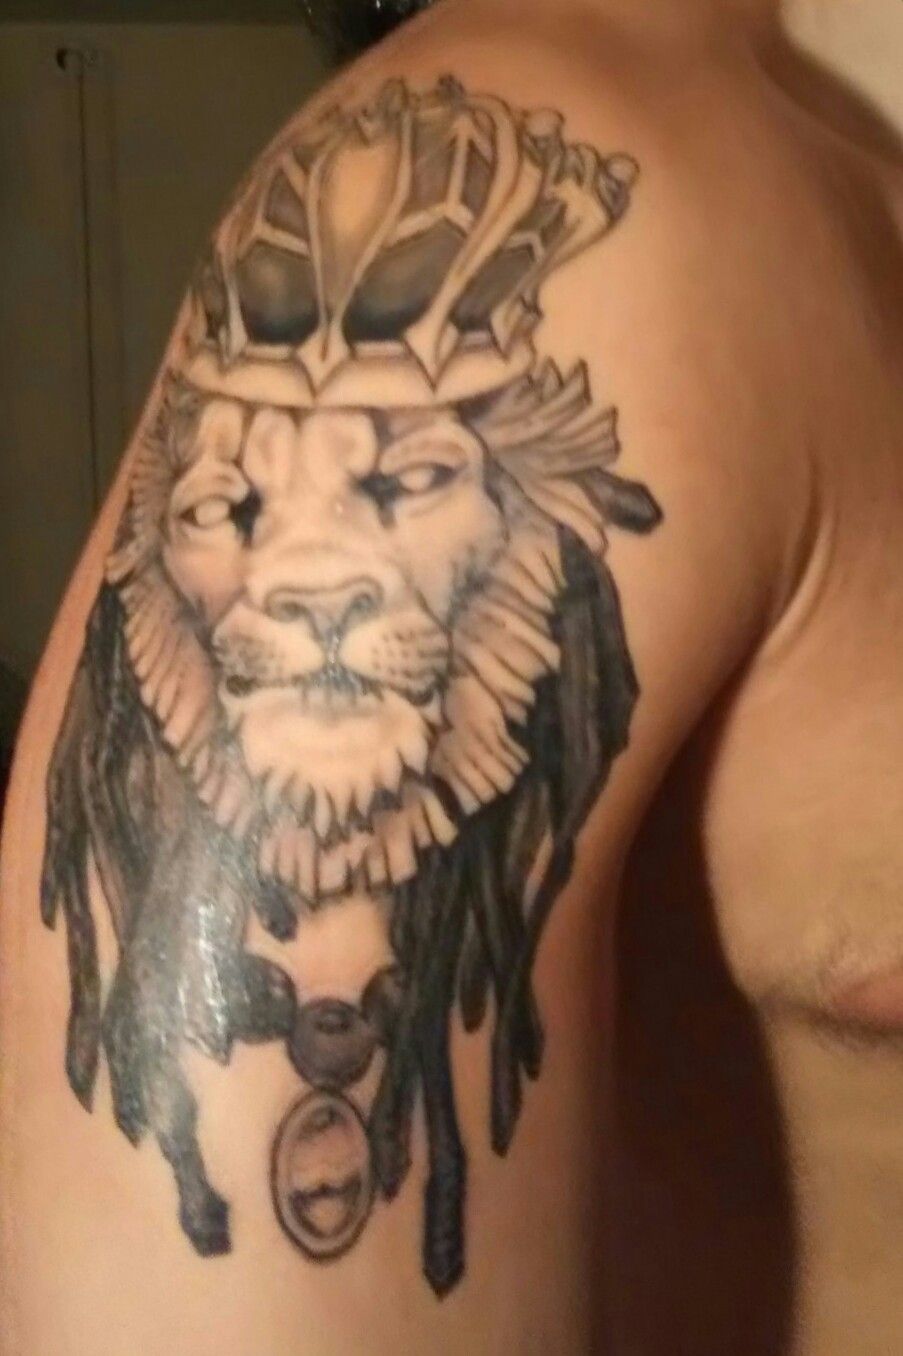 Shades of Energy Tattoos  Dreadlocks  lion tattoo done by  paramsingh37 3 hours of work  king of the jungle crown  blackandgreytattoo pune india koregaonpark power  Facebook